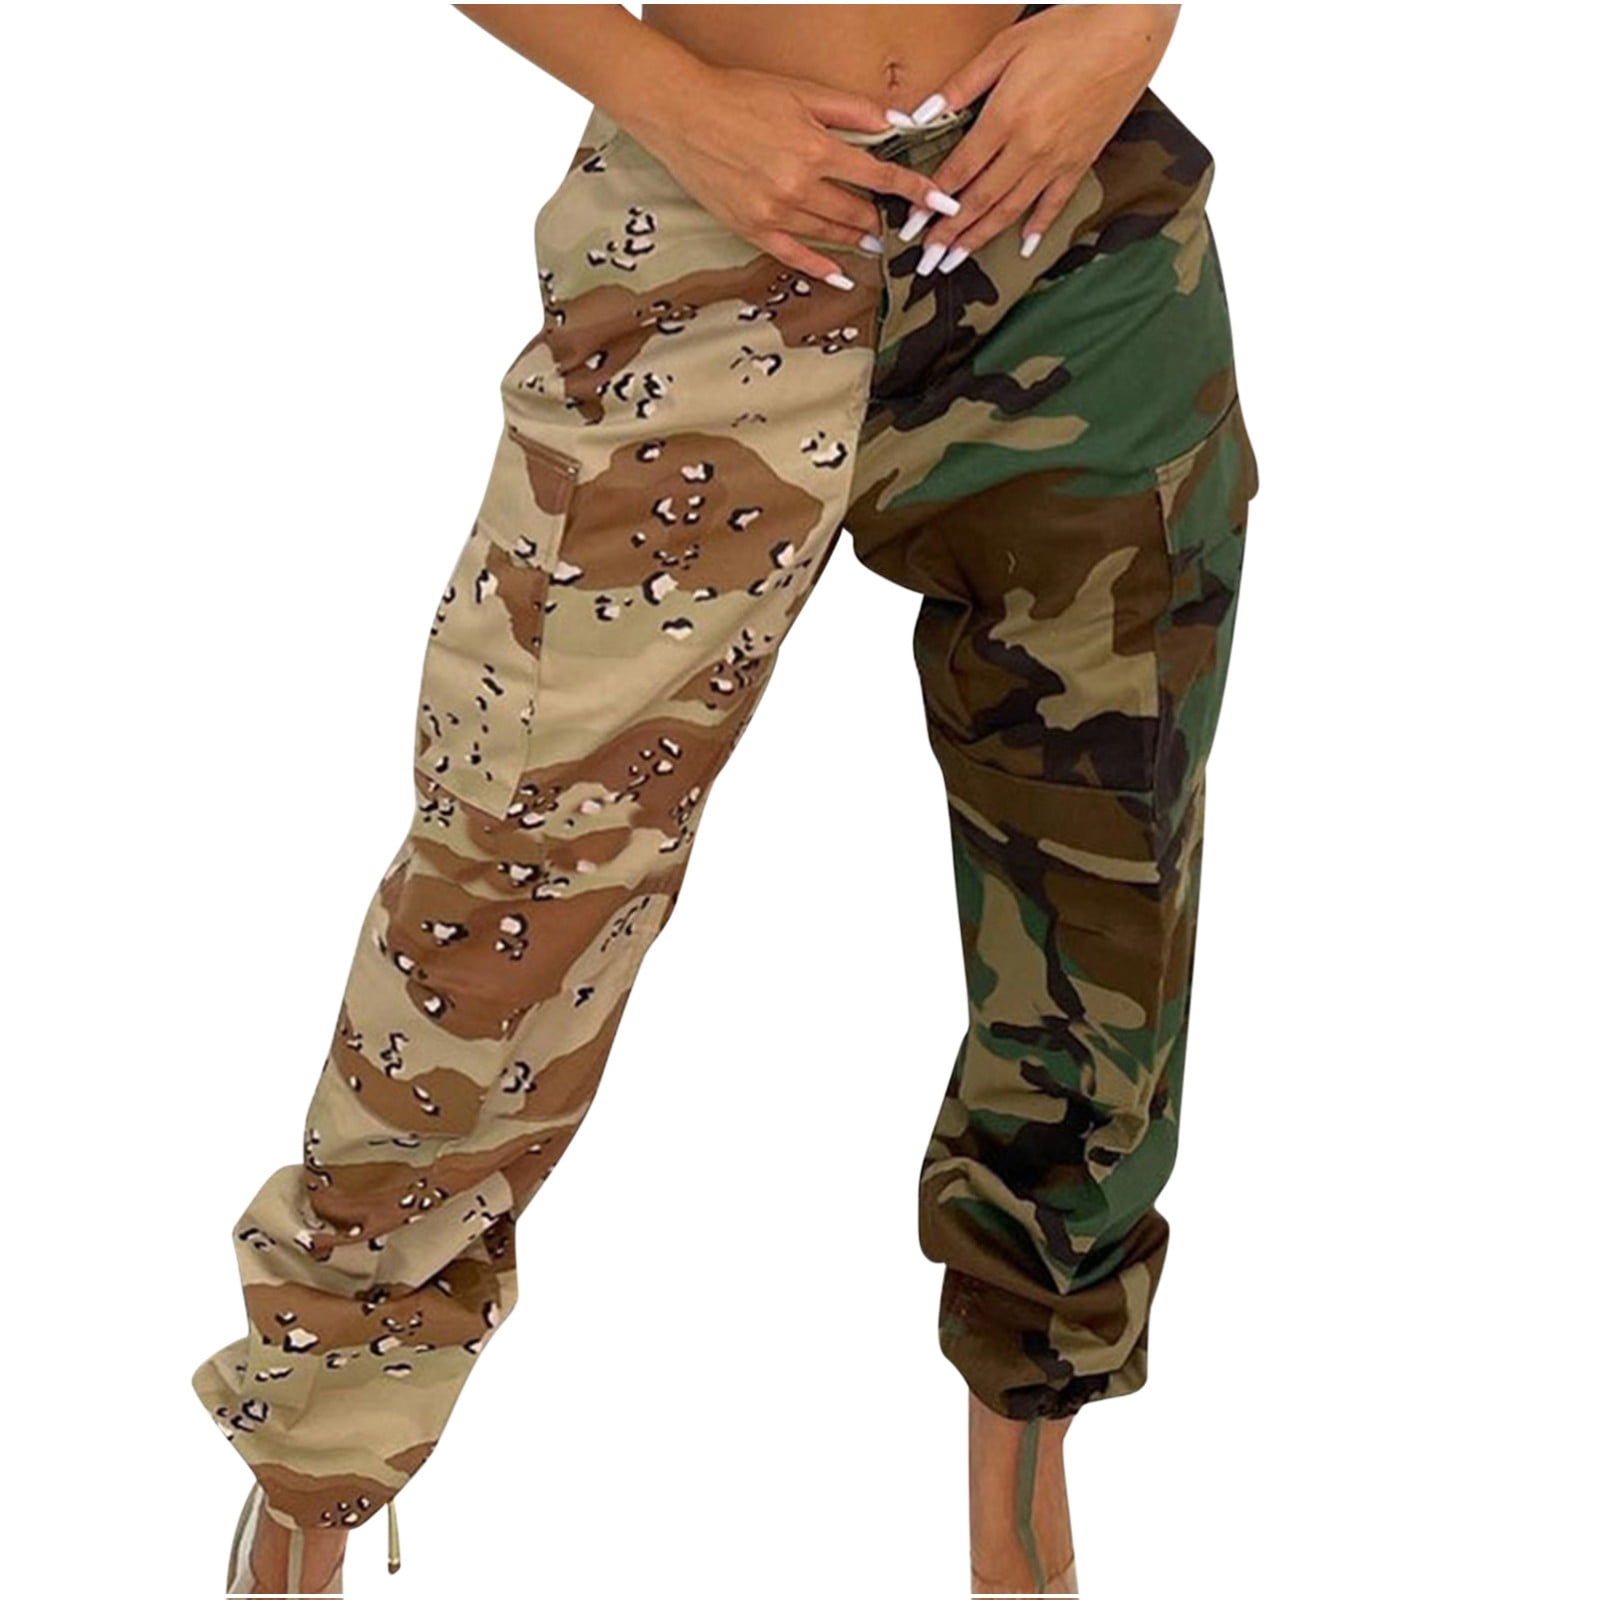 Women's Cargo Camo Pants High Waist Trousers Camouflage Active